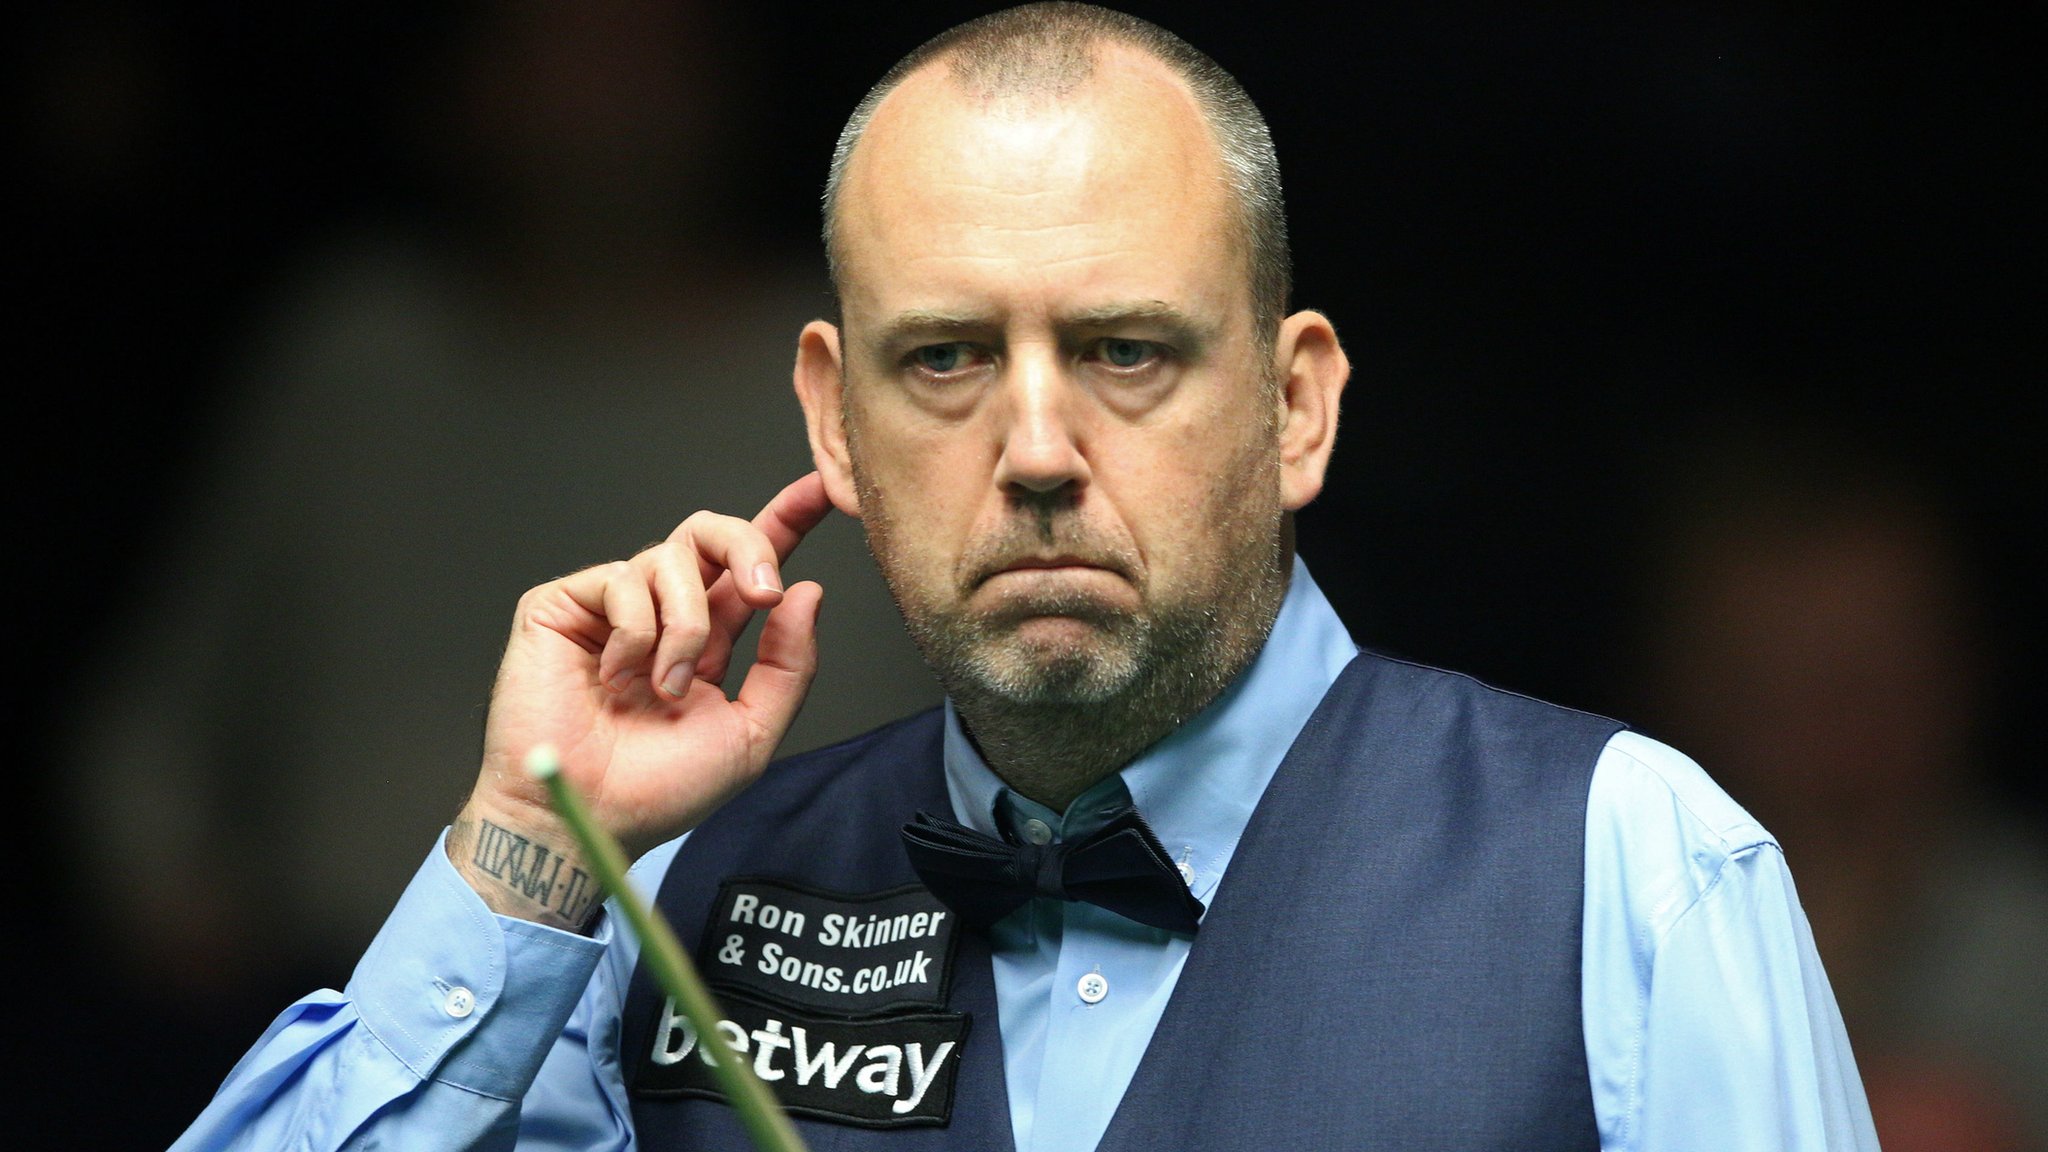 First Gareth Bale, now snooker star Mark Williams says he prefers golf GolfMagic